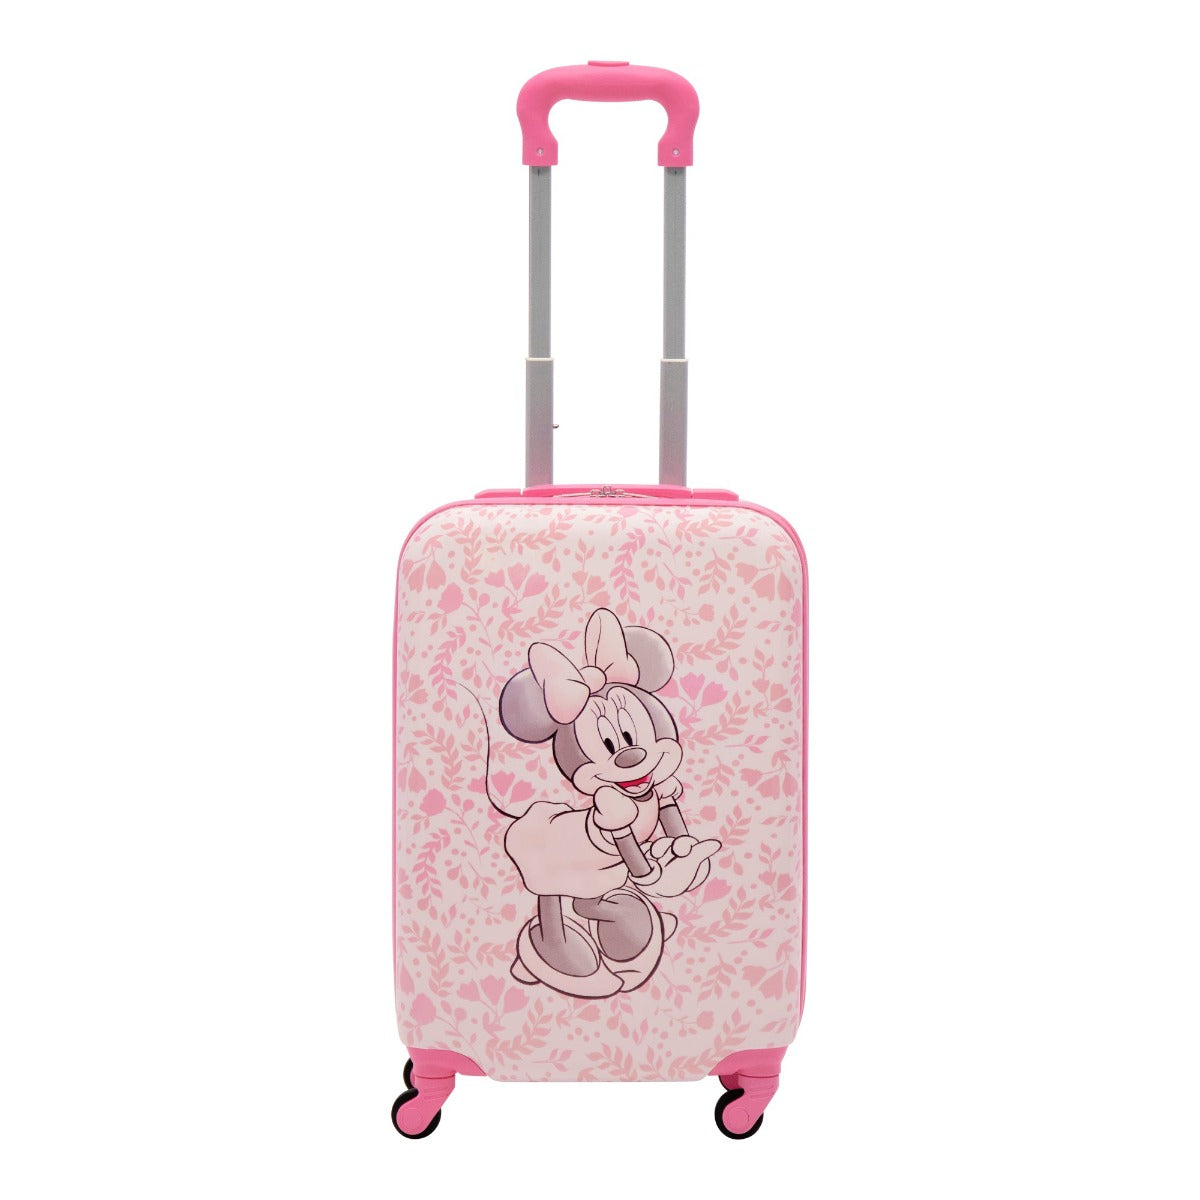 Disney Ful Minnie Mouse Floral Pink Hardside Spinner Suitcase - 20.5" Best Kids Carry On Luggage